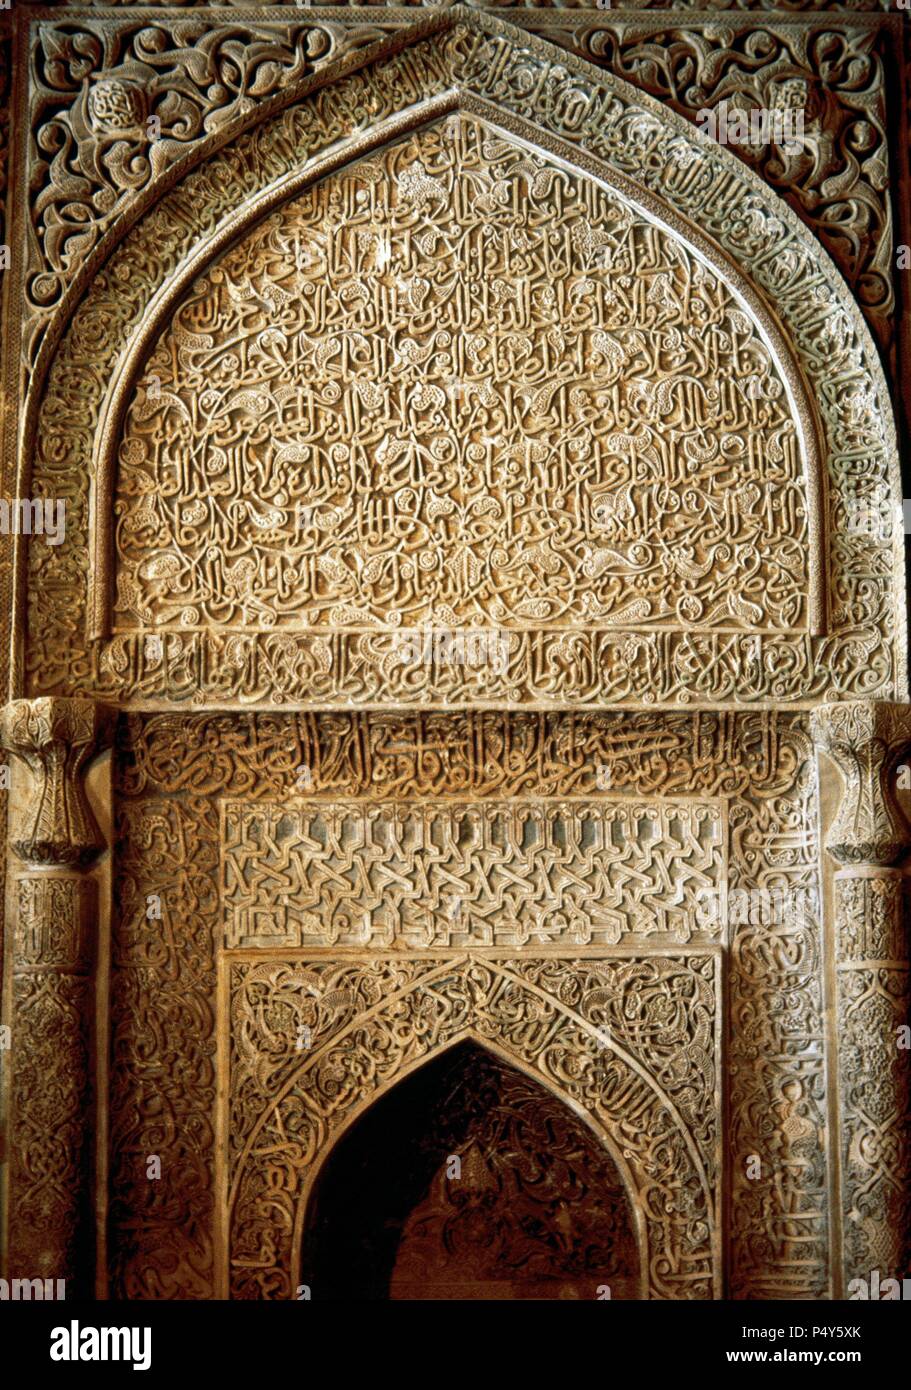 Iran. Isfahan. Masjed-e Jame (Friday Mosque). The Oljeitu Mihrab, constructed in 1310 by Mongol ruler Oljeitu. Stock Photo